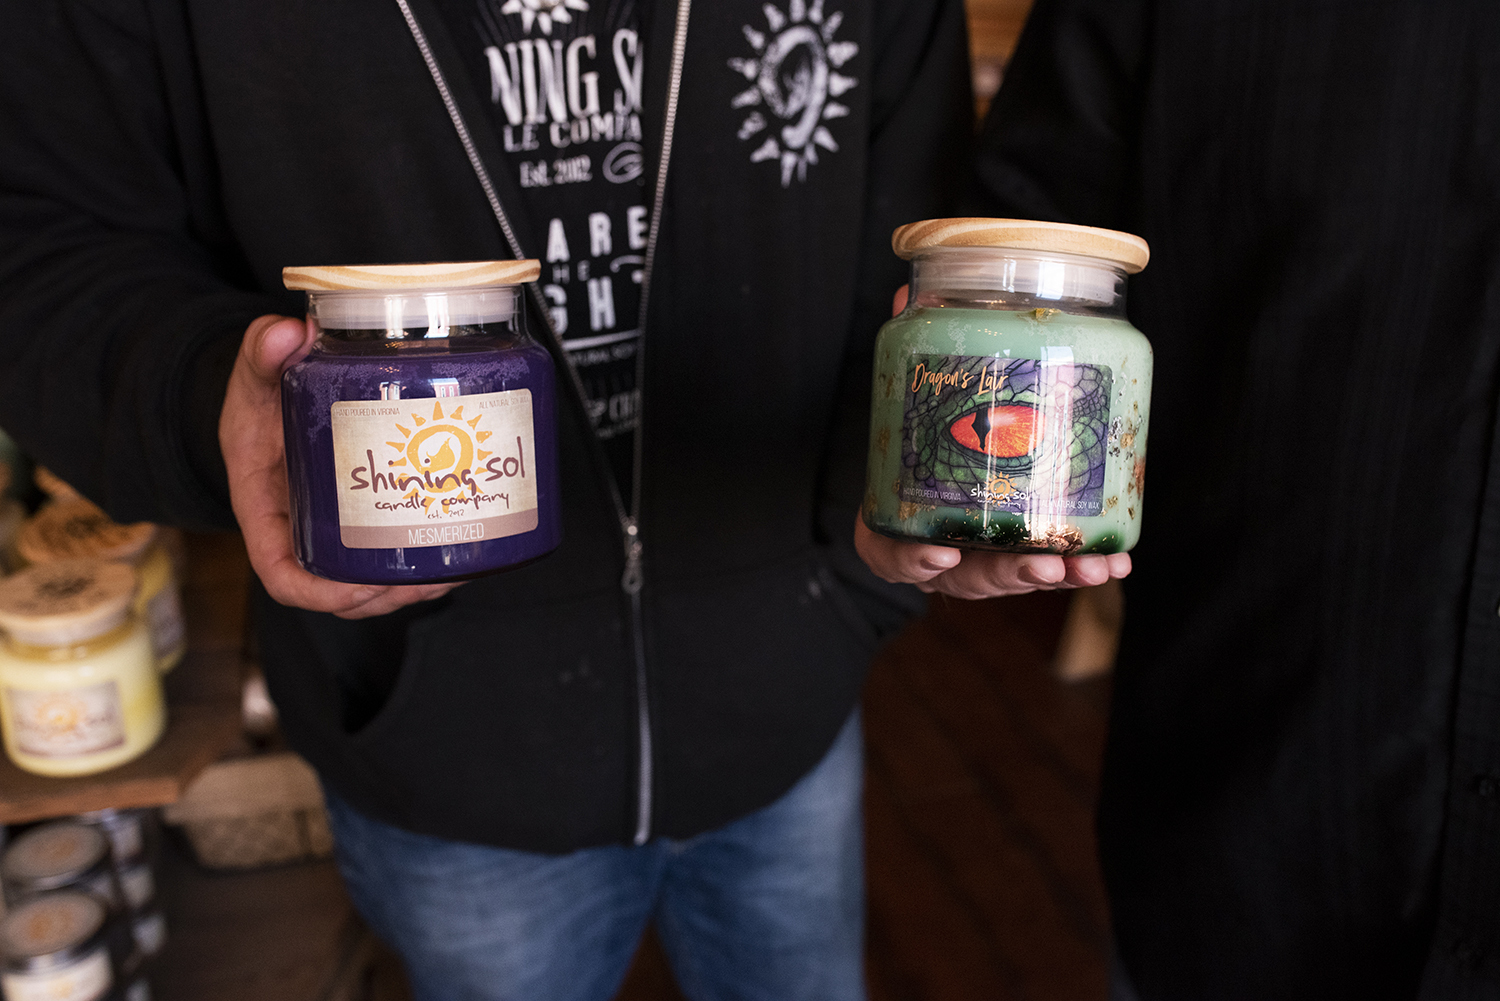 Holding candle products.